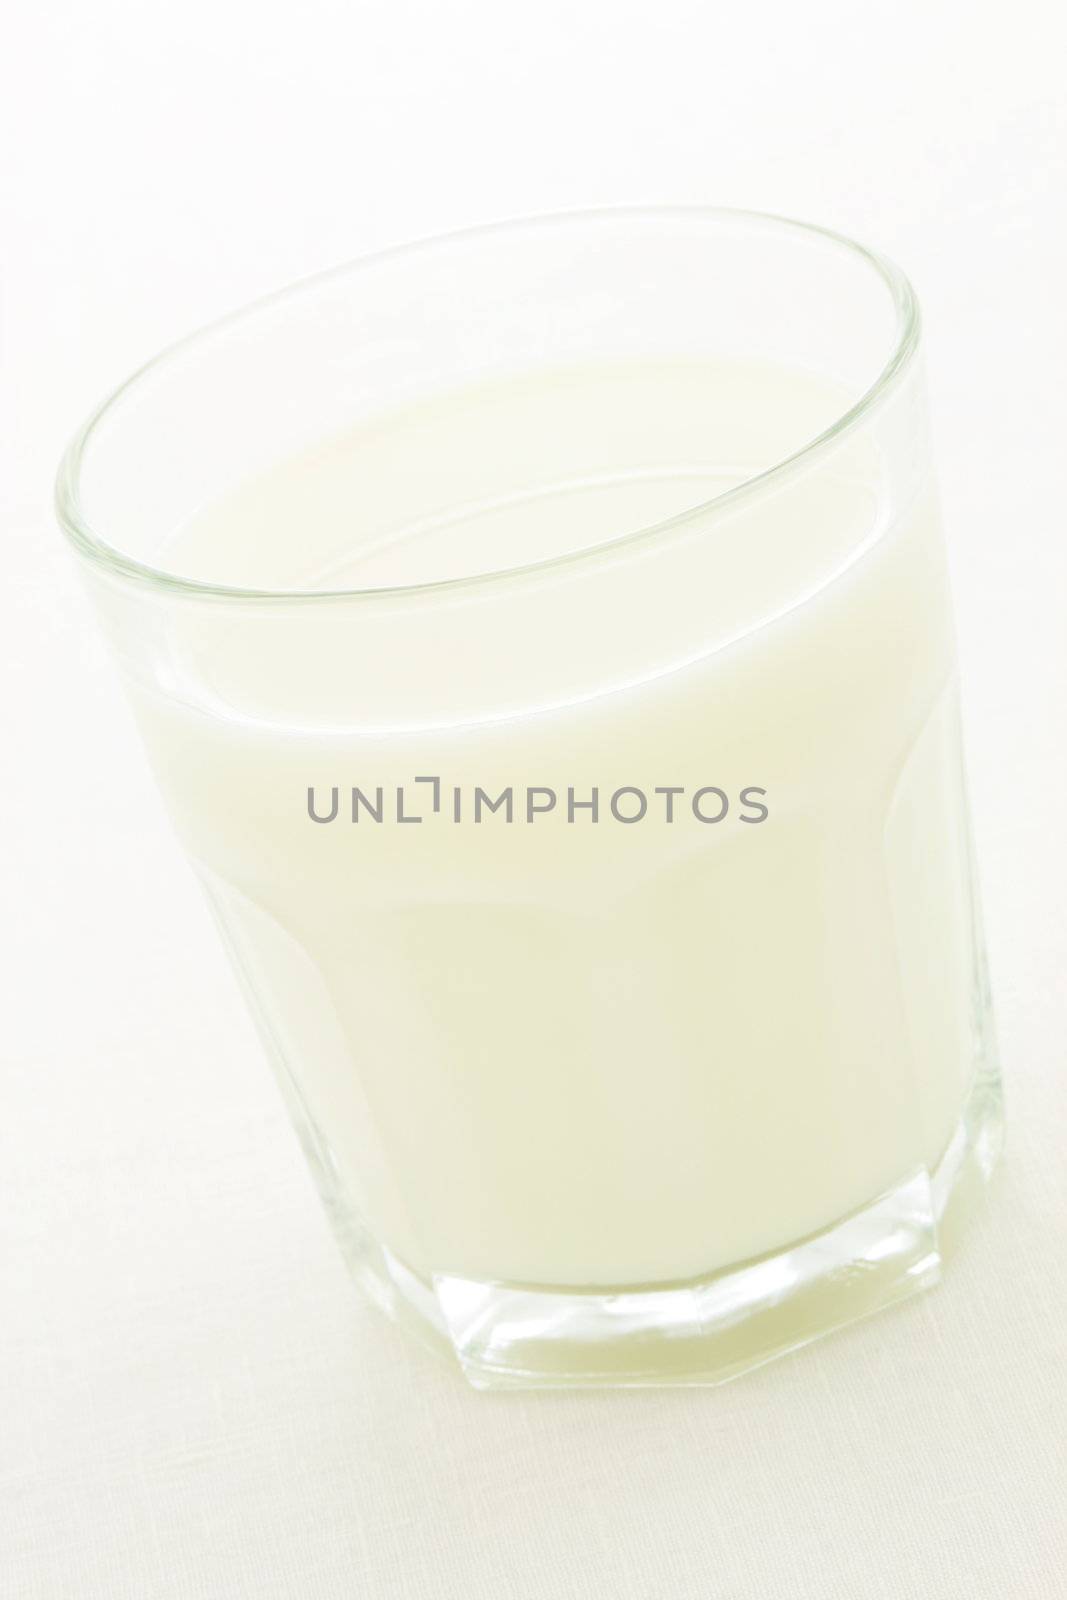 Delicious, nutritious and fresh glass of milk.